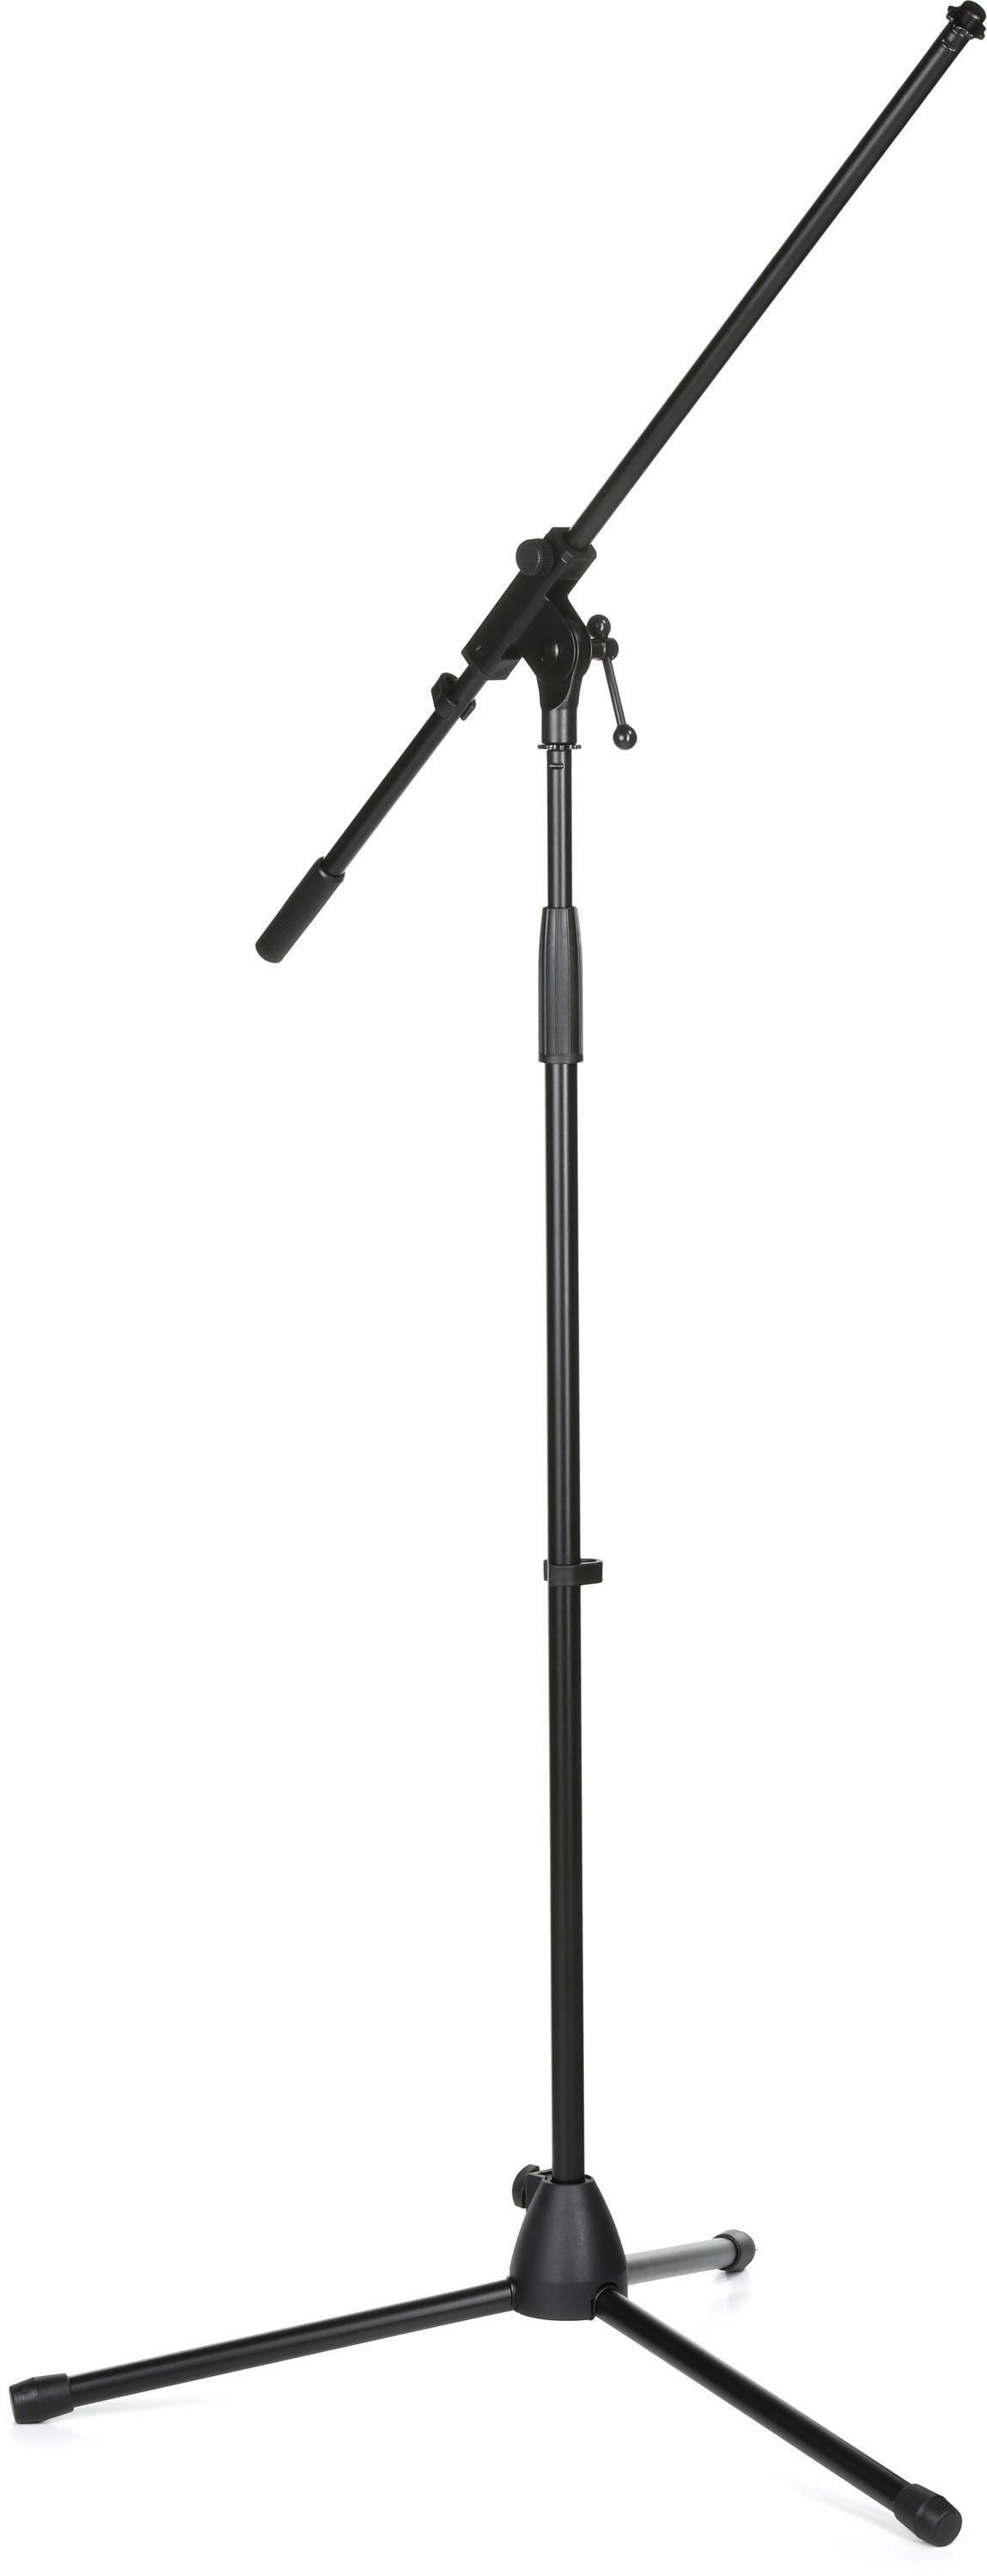 Behringer MS2050-L Professional Tripod Microphone Stand